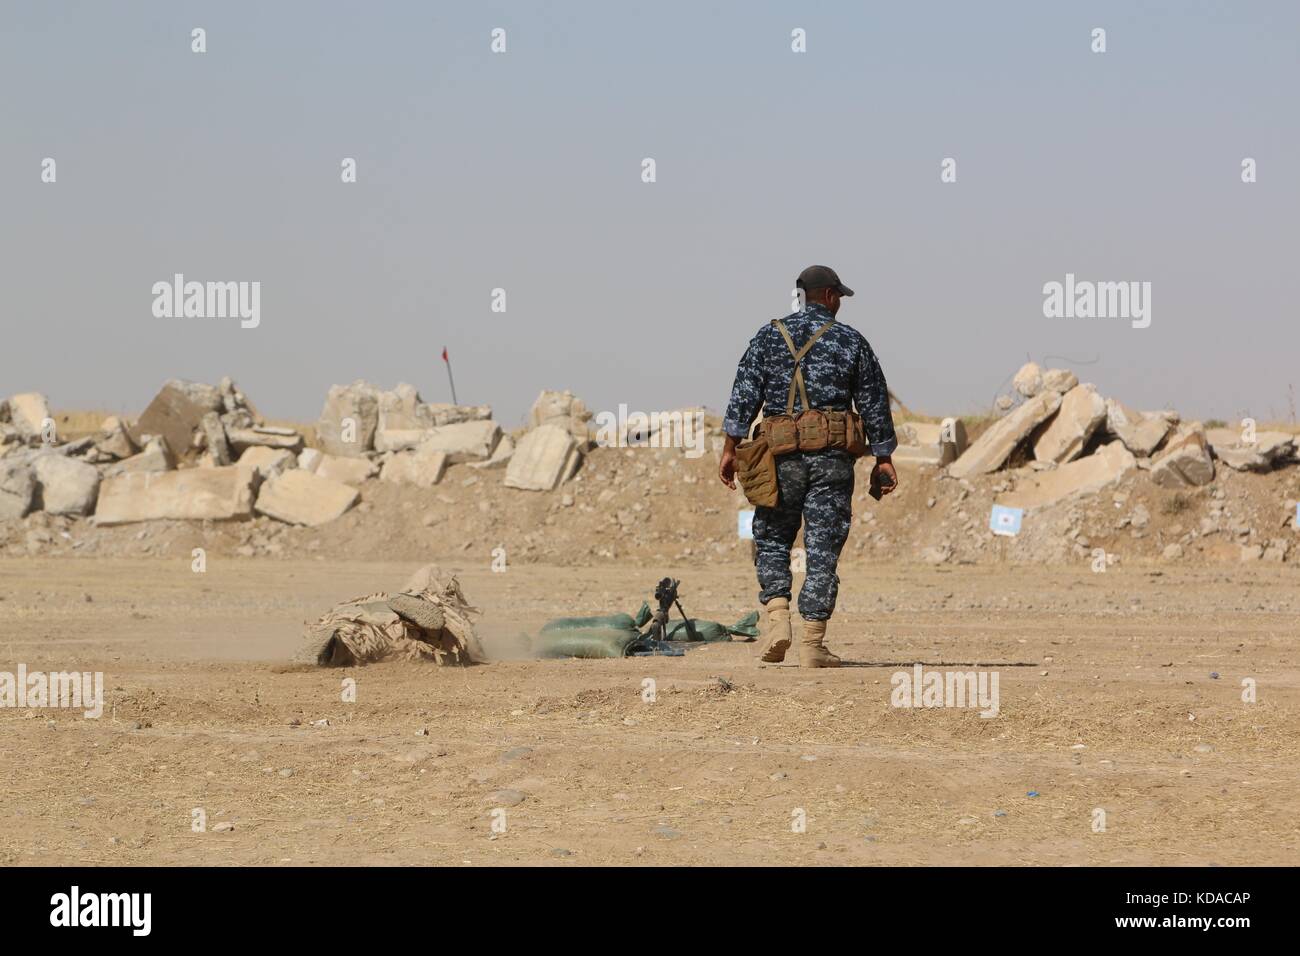 An Iraqi Federal Police officer sets up his weapon during a sniper training course with U.S. soldiers June 7, 2017 in Mosul, Iraq. Stock Photo